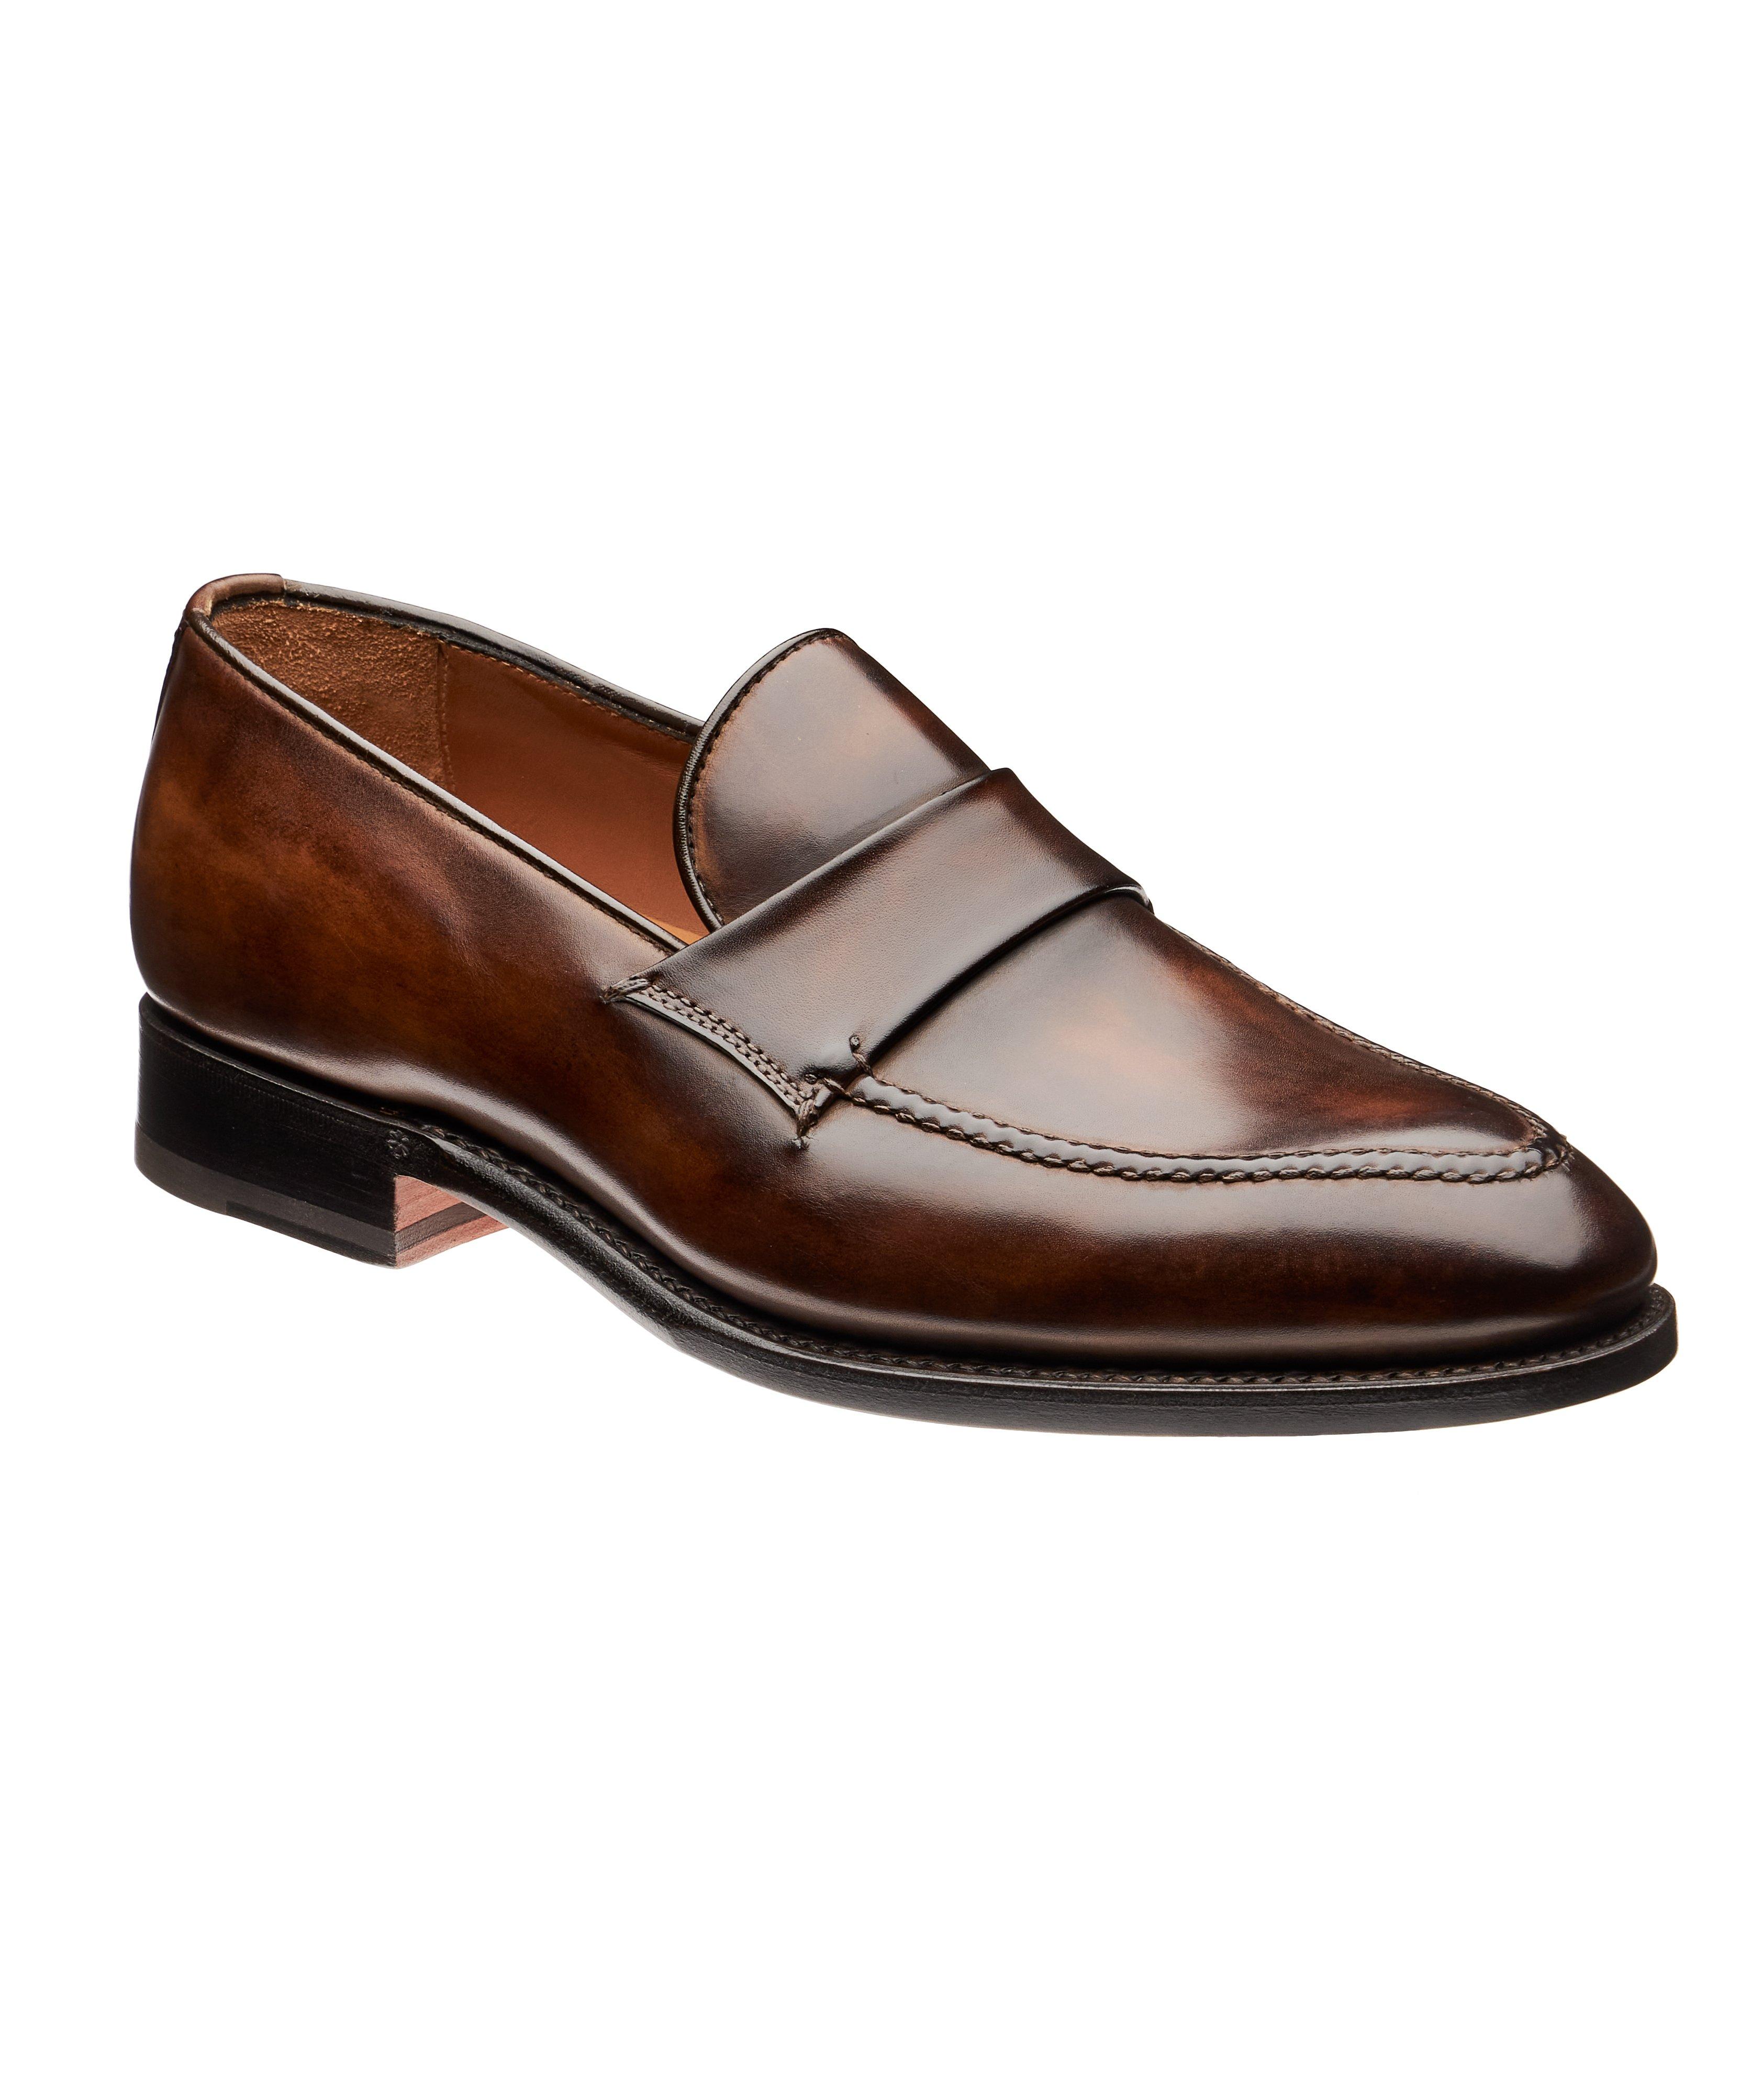 Harry Rosen Burnished Leather Penny Loafers. 1